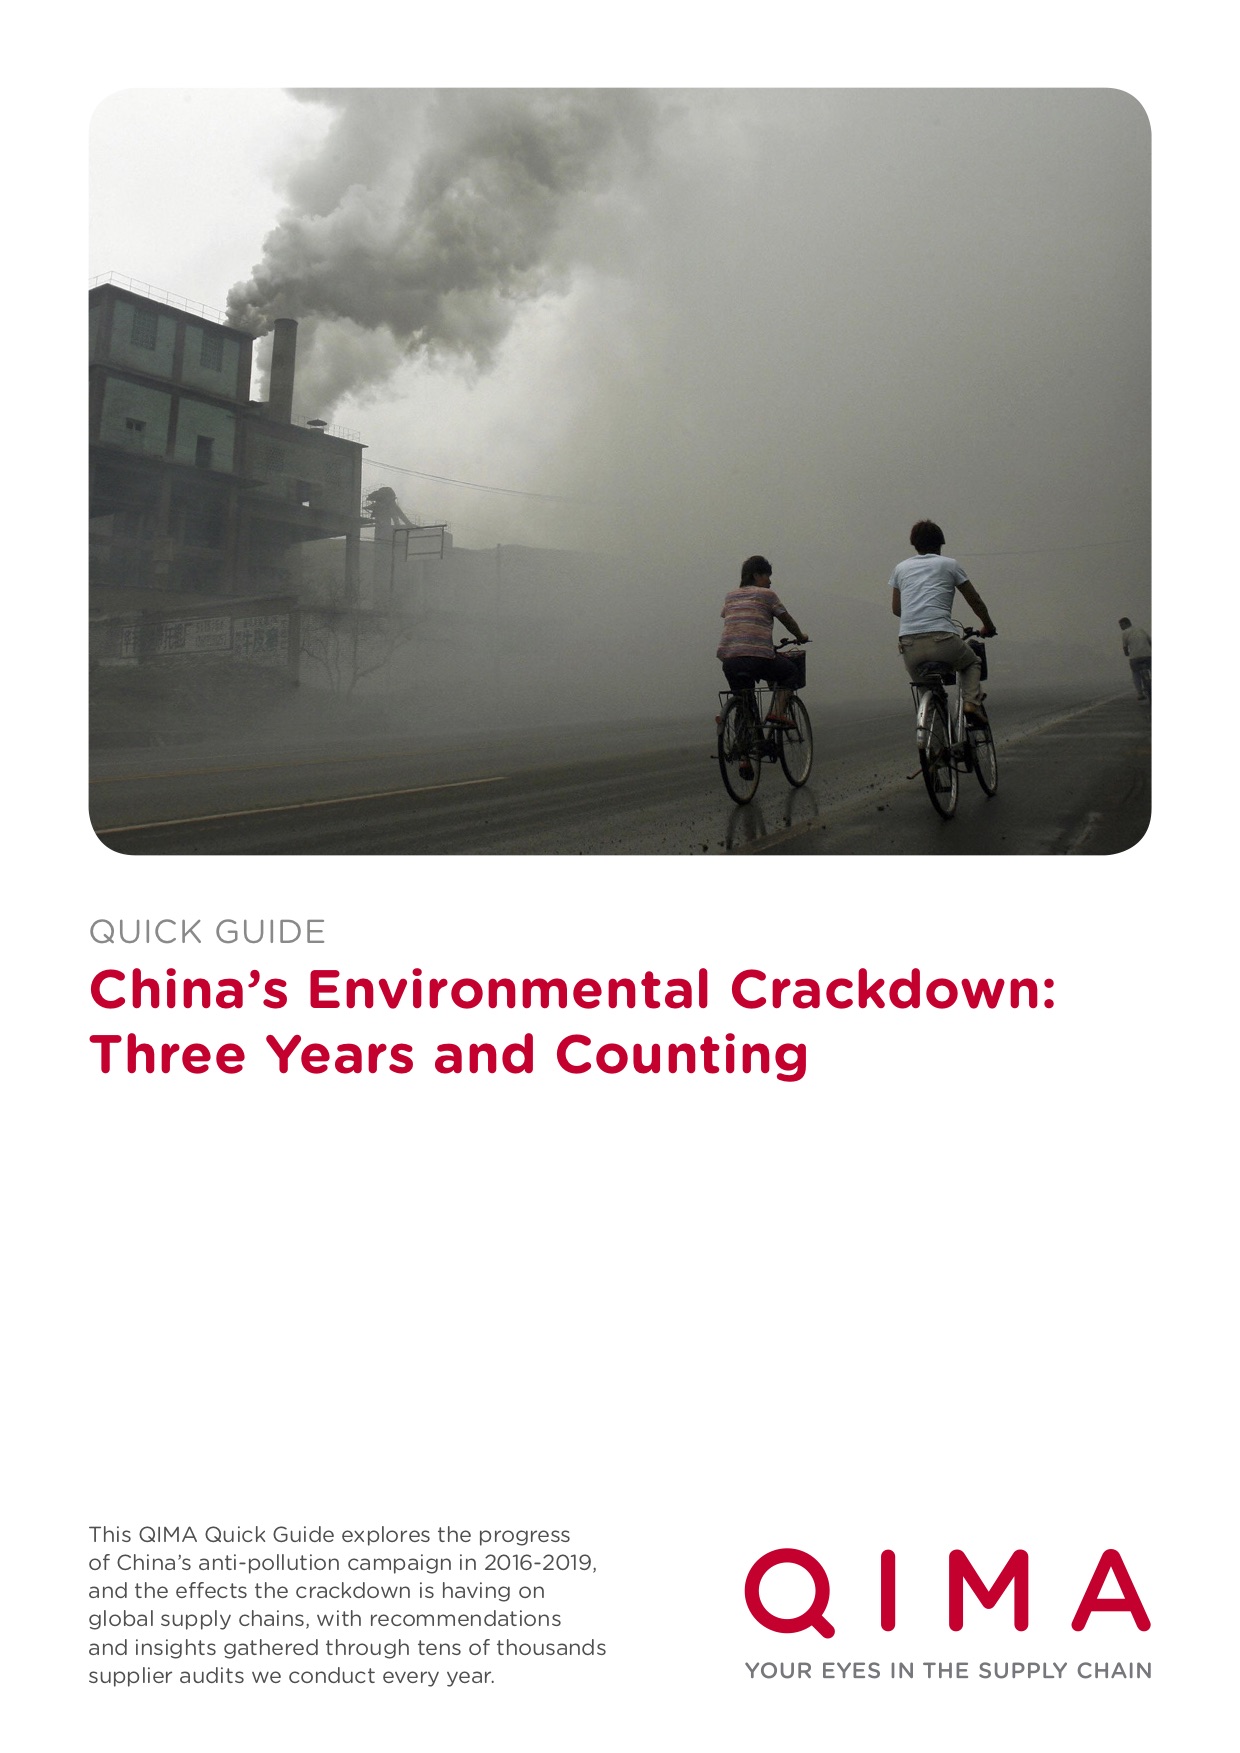 China’s Environmental Crackdown: is Your Supply Chain Ready?